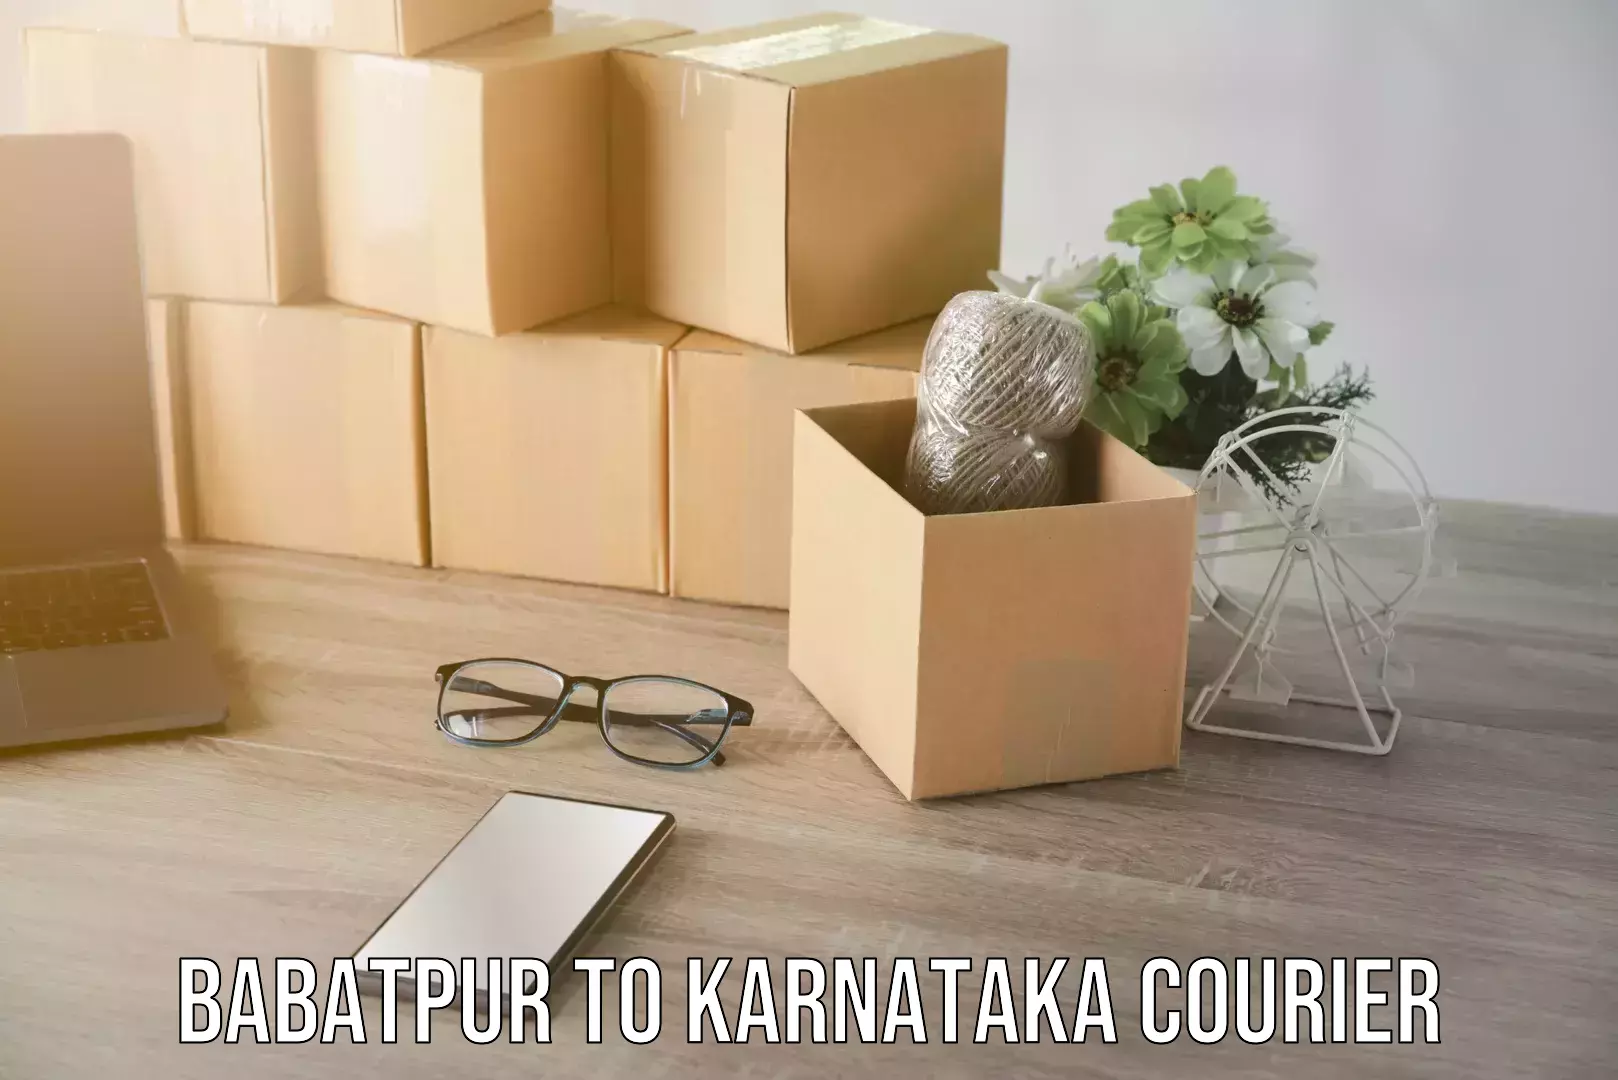 Nationwide courier service in Babatpur to Karnataka